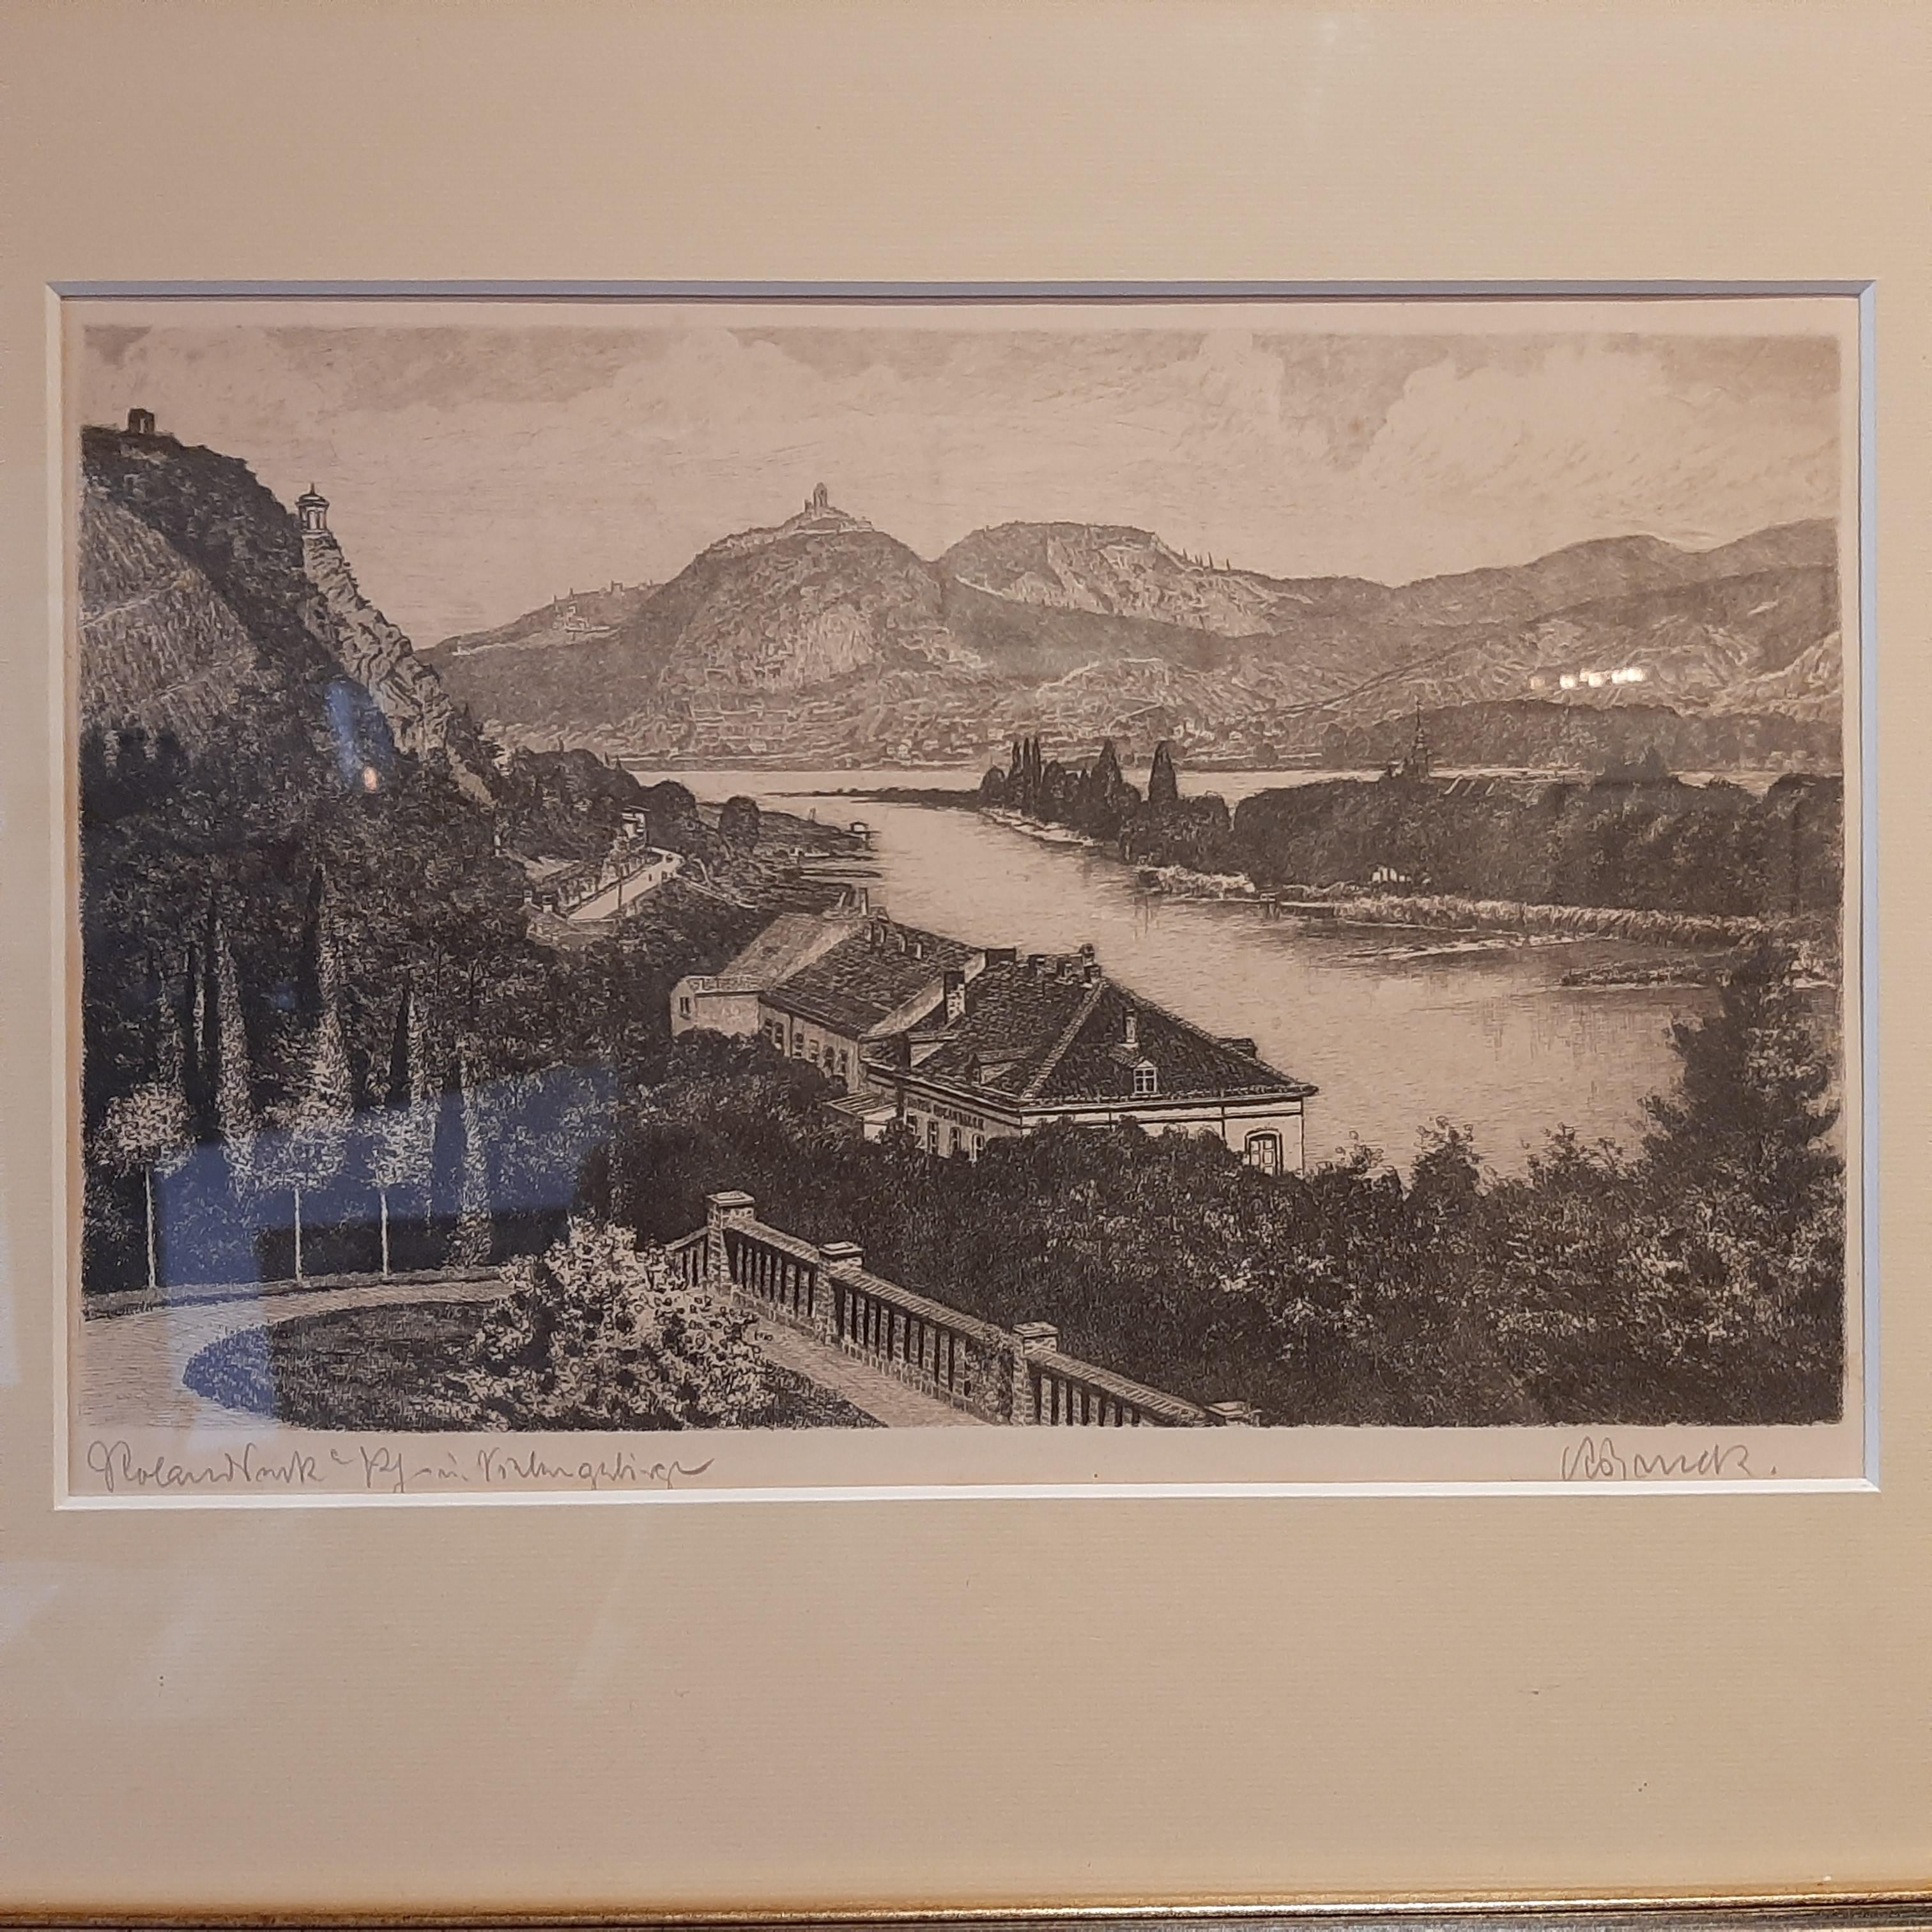 Etching of Rolandseck and the Rhine river, Germany. Rolandseck is a borough of Remagen in Rhineland-Palatinate. Etching signed, artists unknown. Published circa 1920.

Frame included. We carefully pack our framed items to ensure safe shipping.